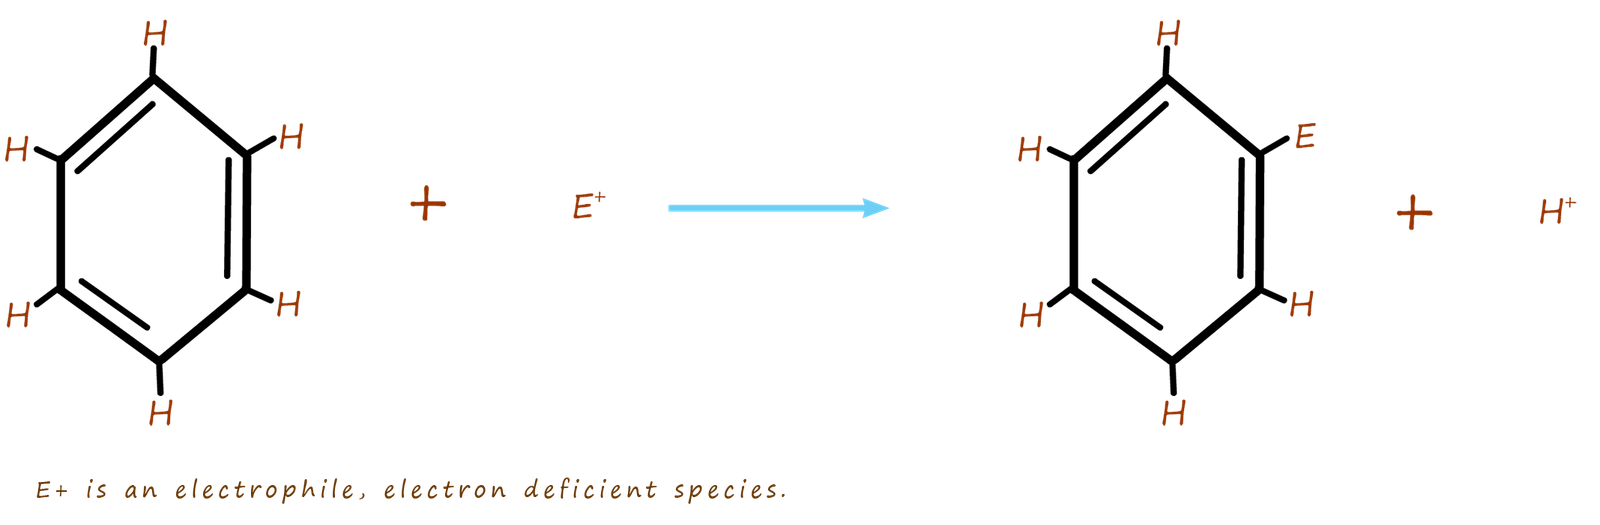 general mechanism of electrophilic subsitution reaction- Friedel Crafts